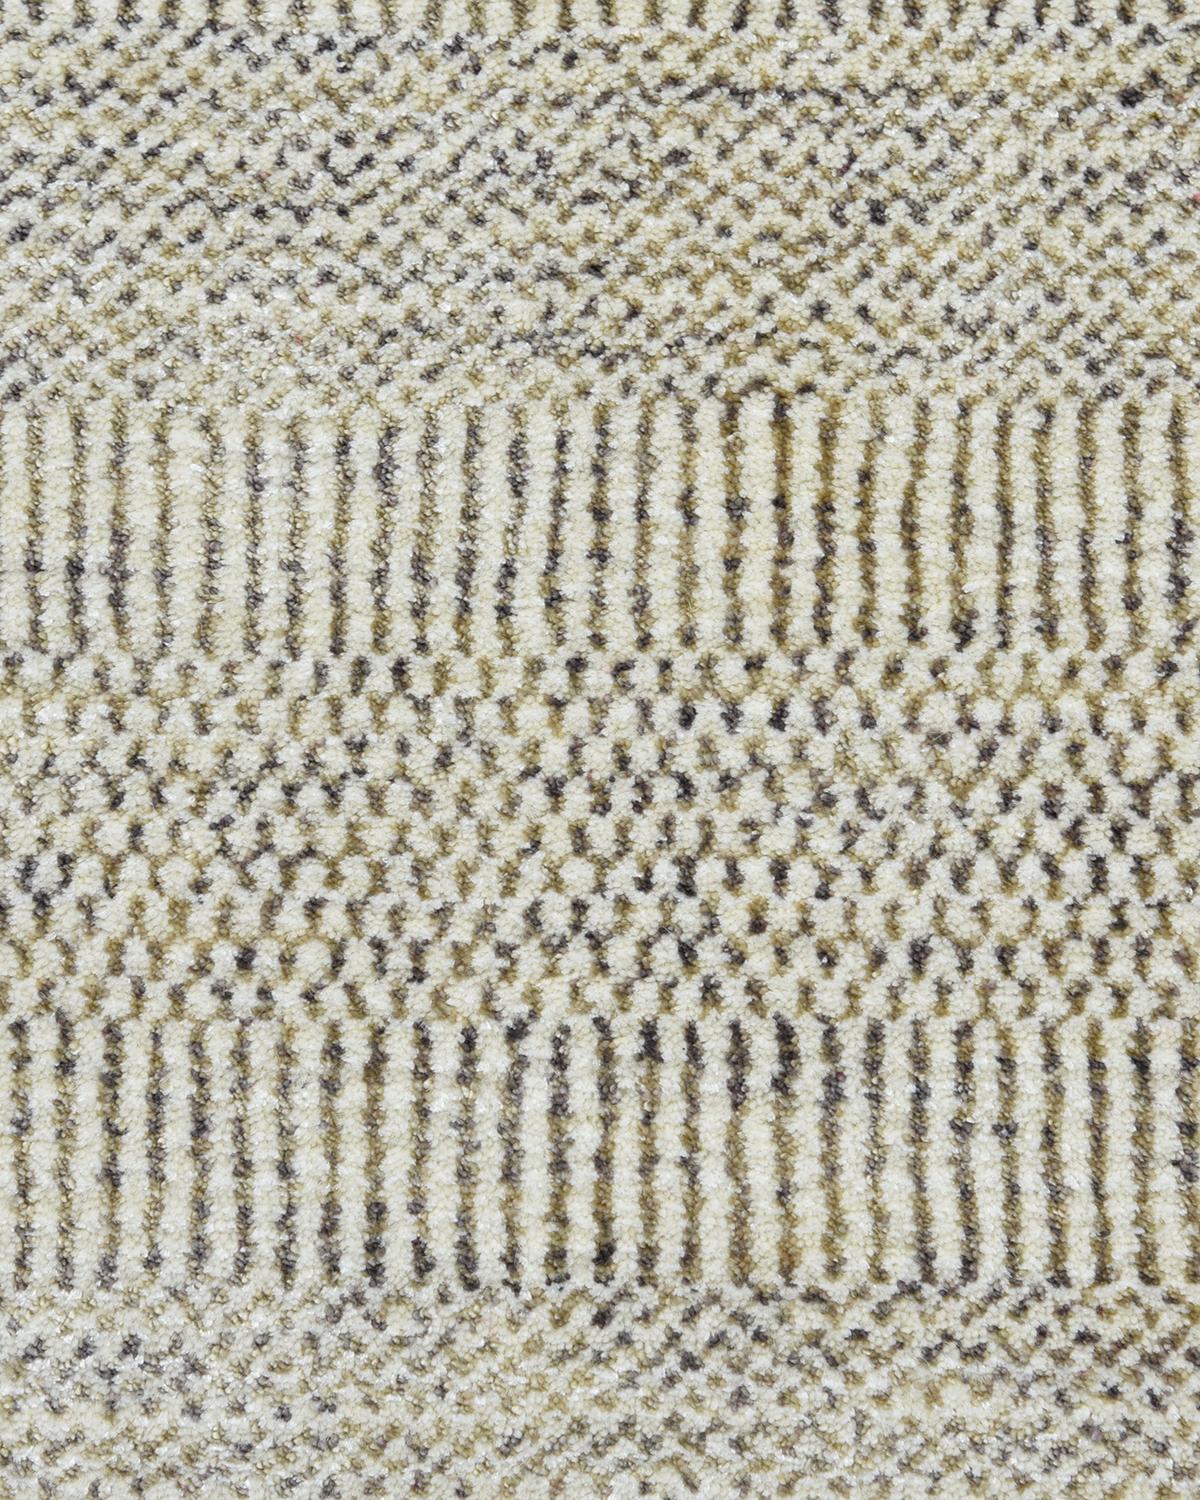 Wool Deloris, Contemporary Solid Handmade Area Rug, Oat For Sale